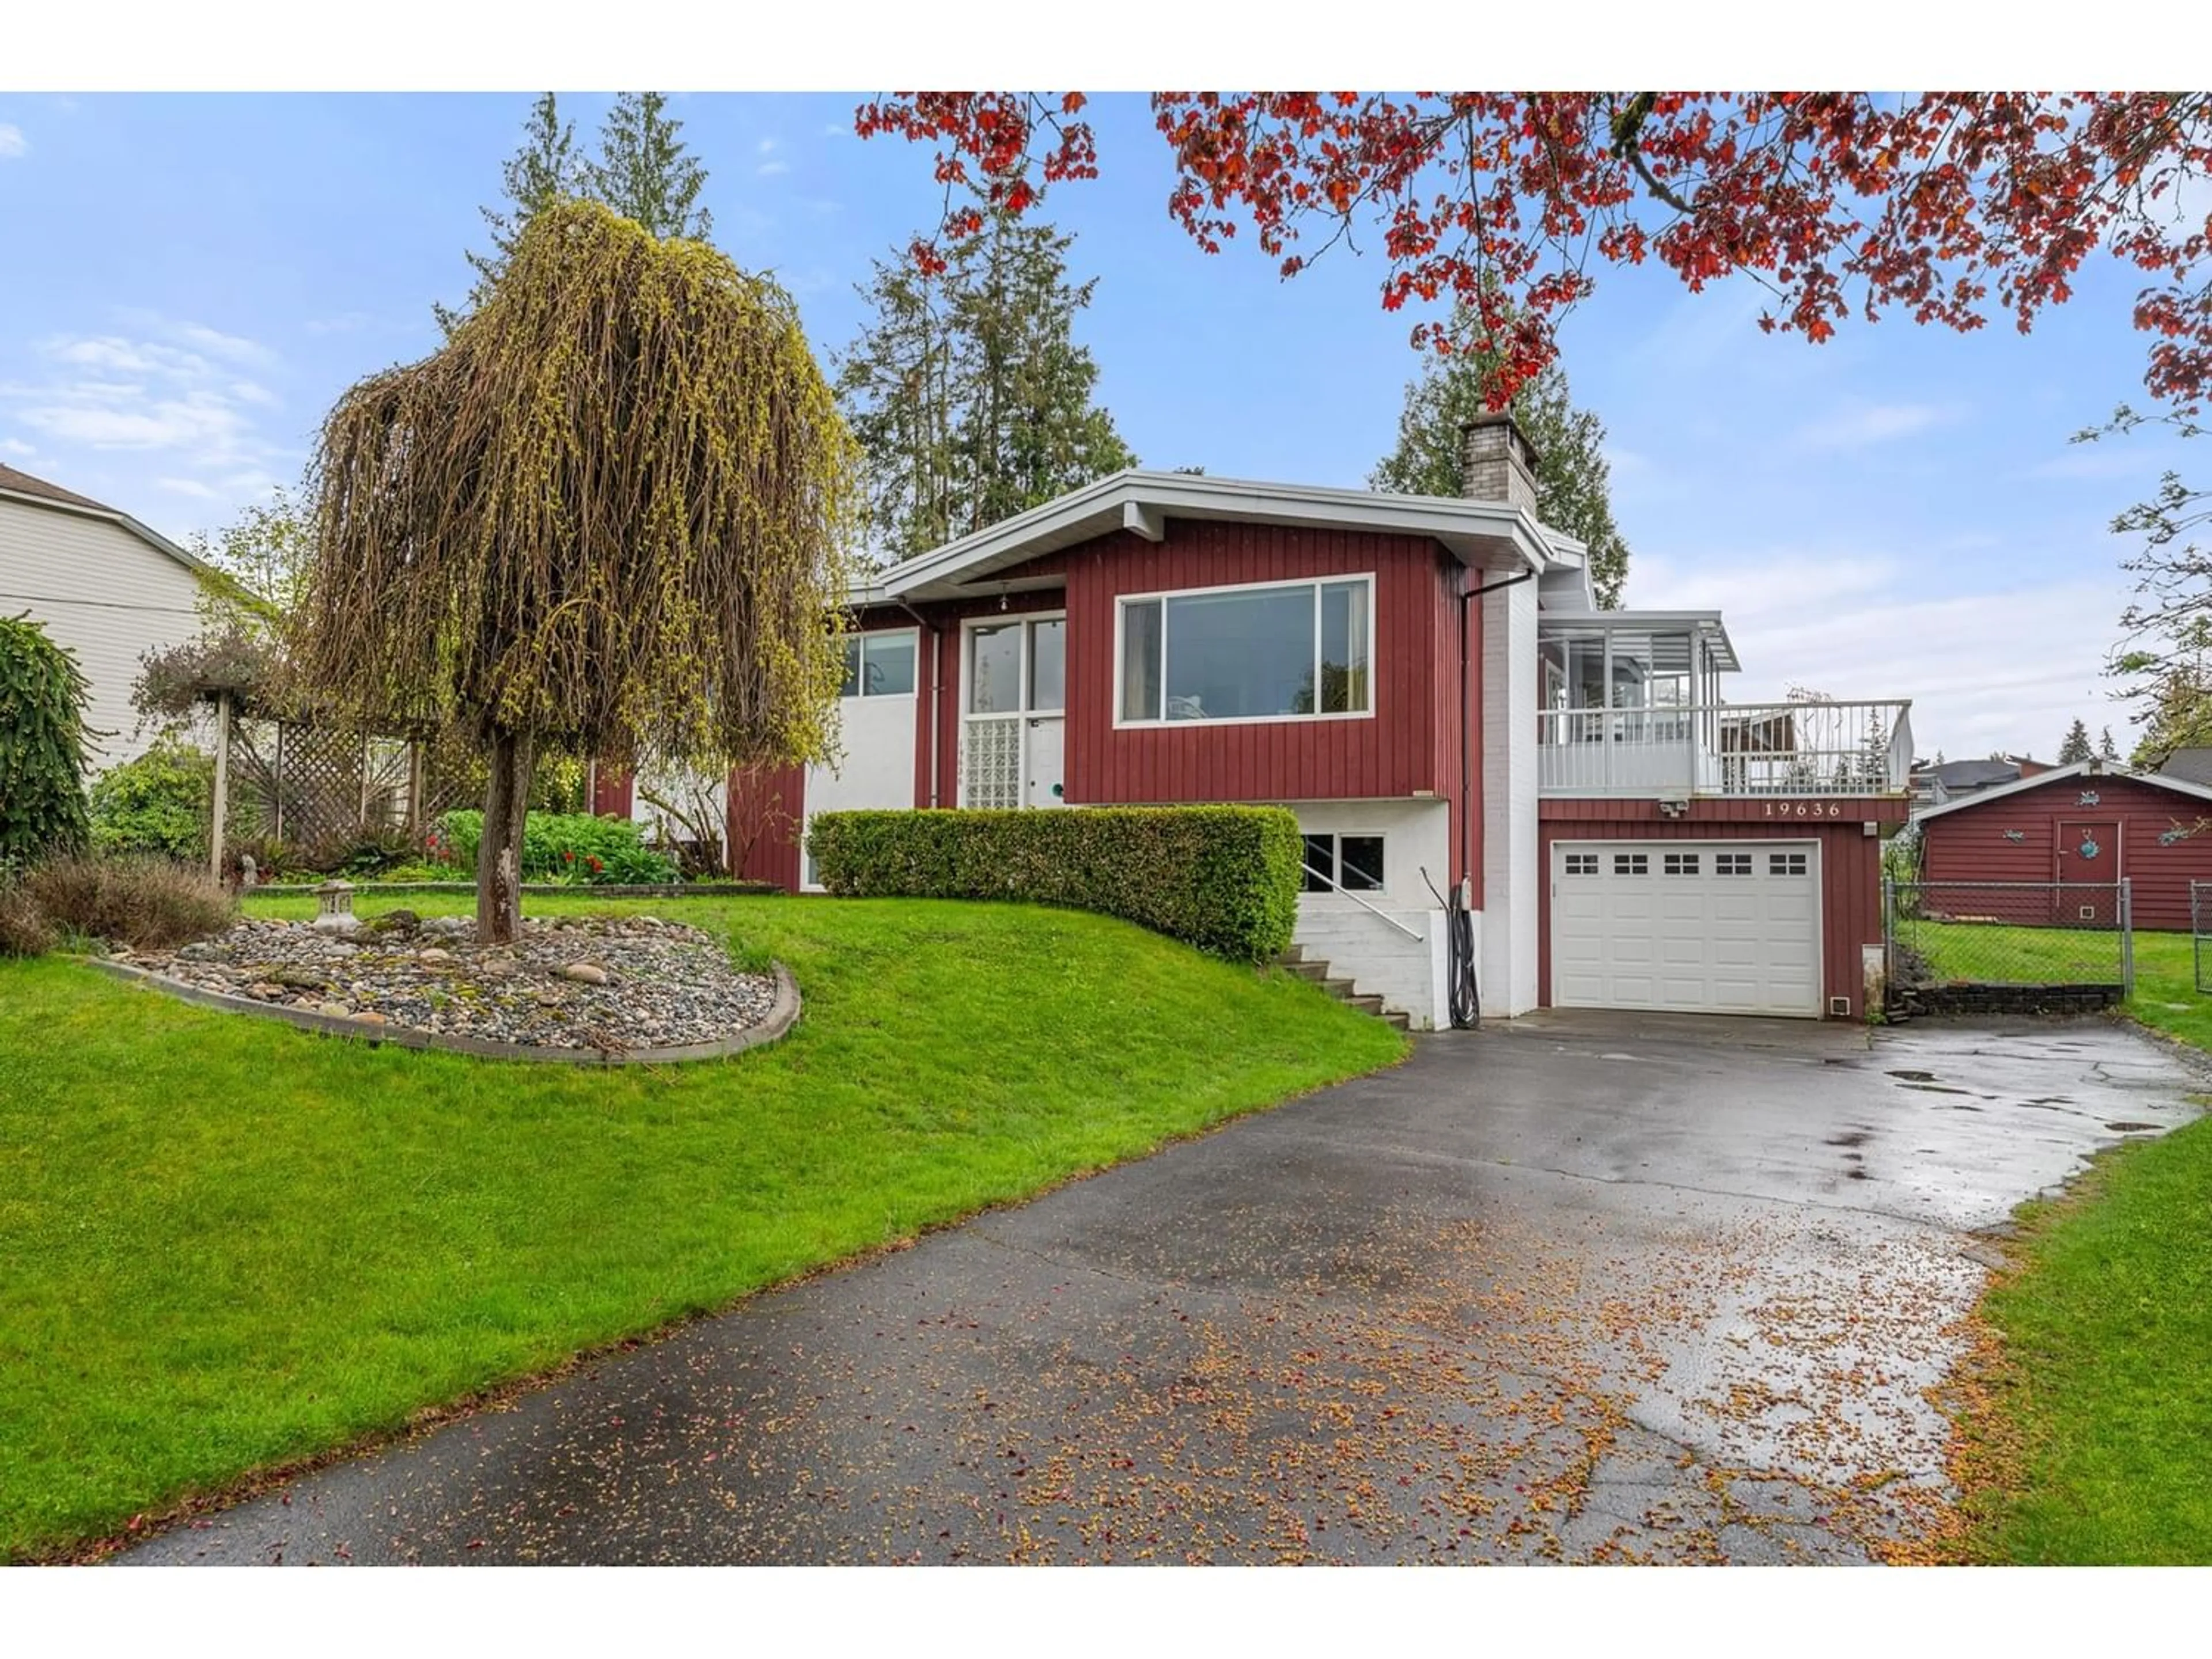 Frontside or backside of a home for 19636 49 AVENUE, Langley British Columbia V3A3R1